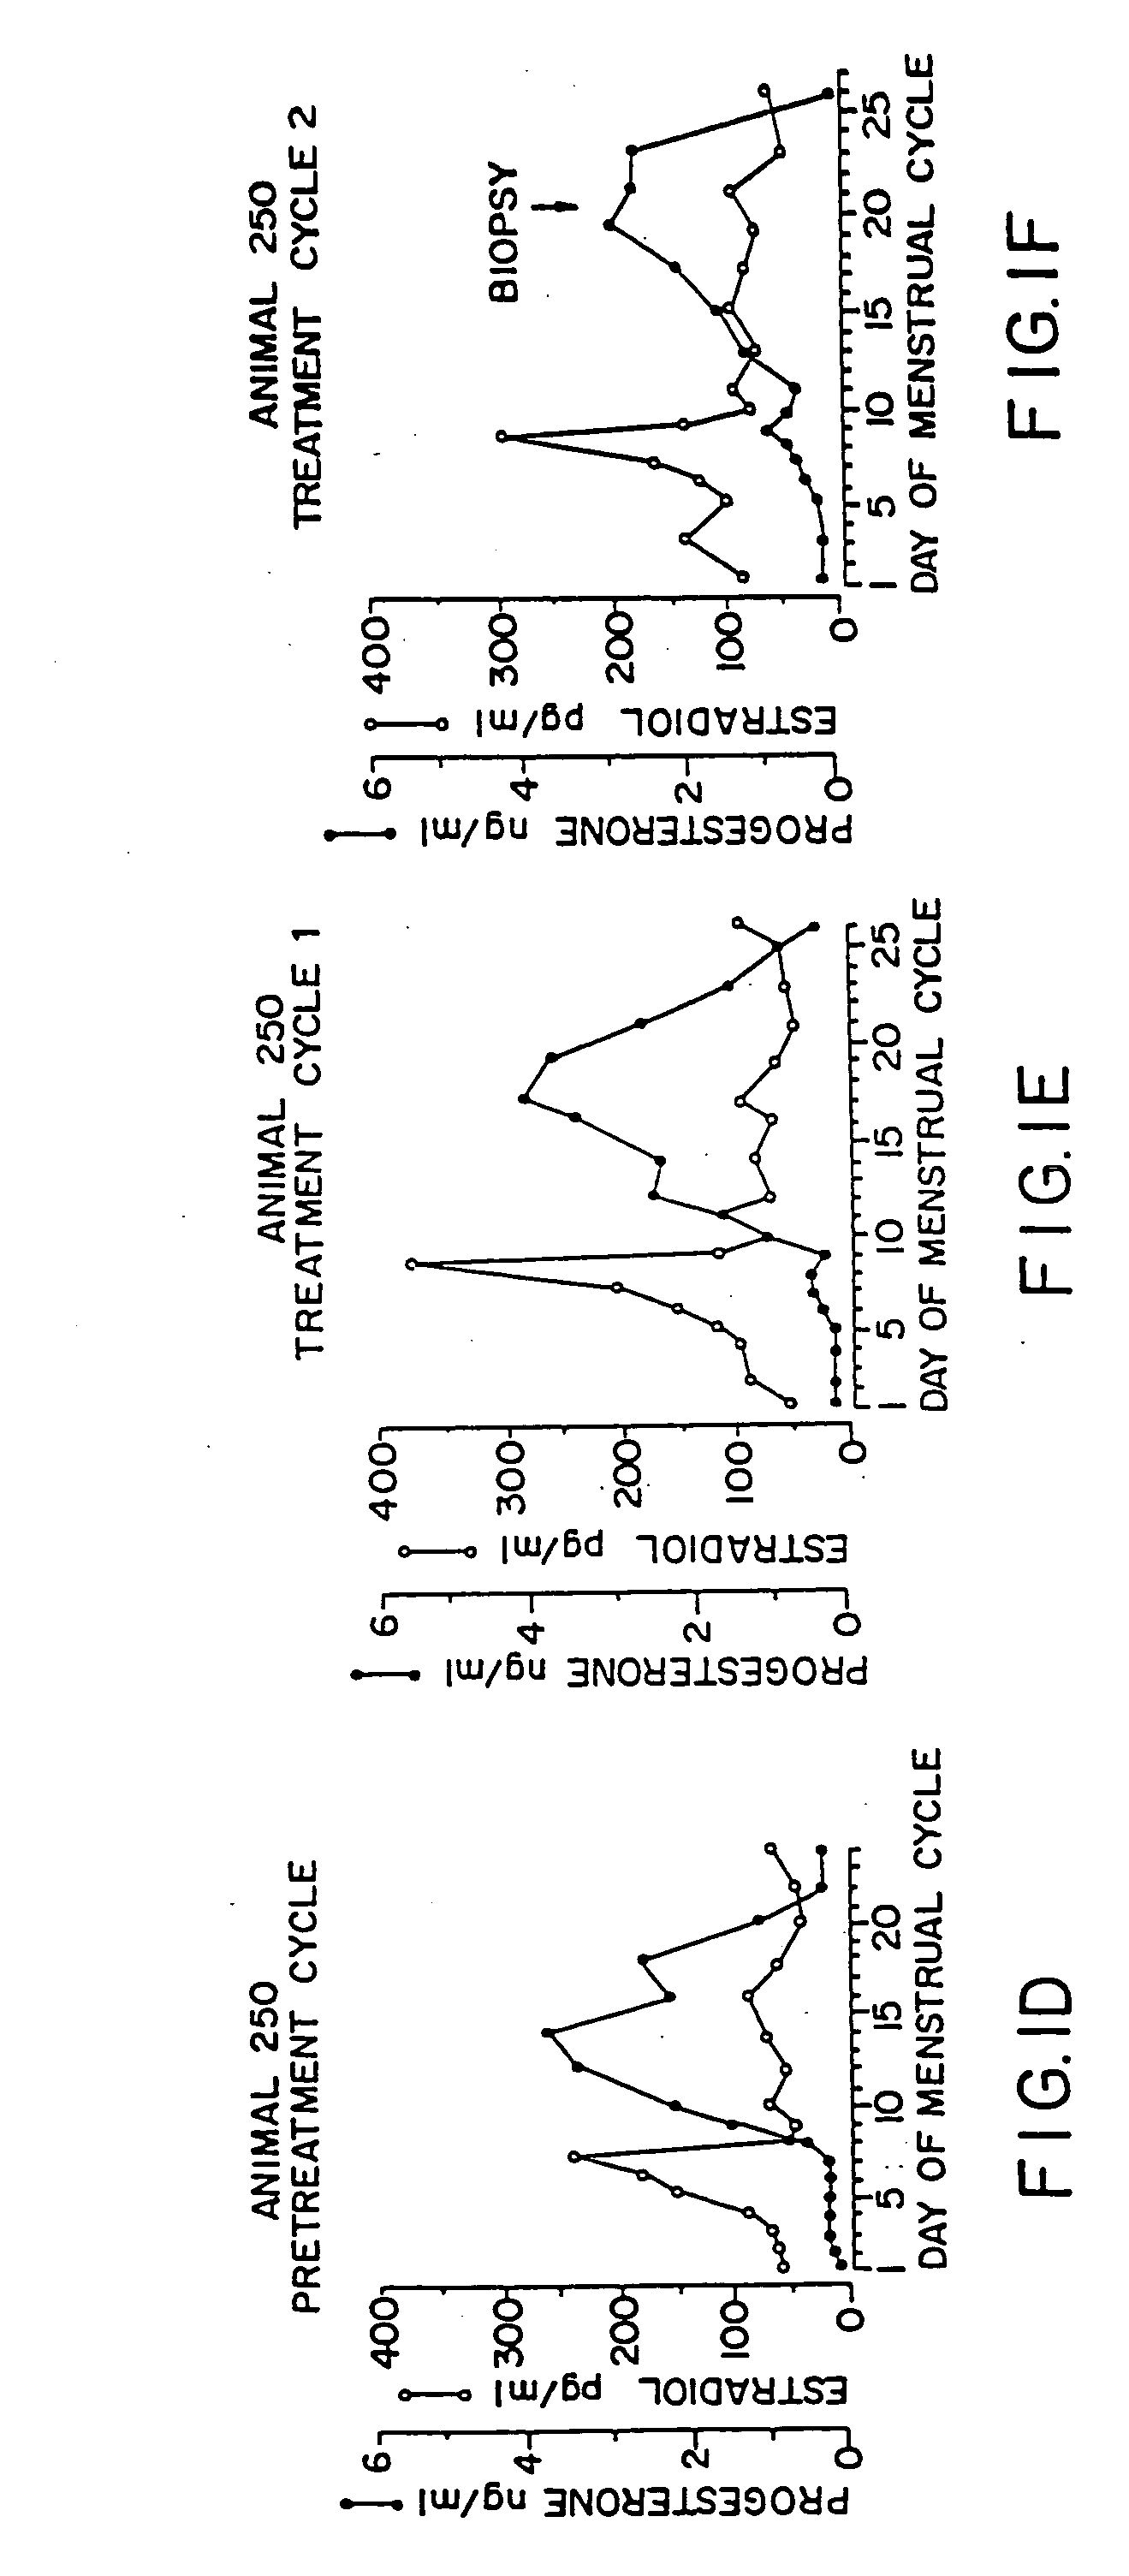 Contraception method using competitive progesterone antagonists and novel compounds useful therein